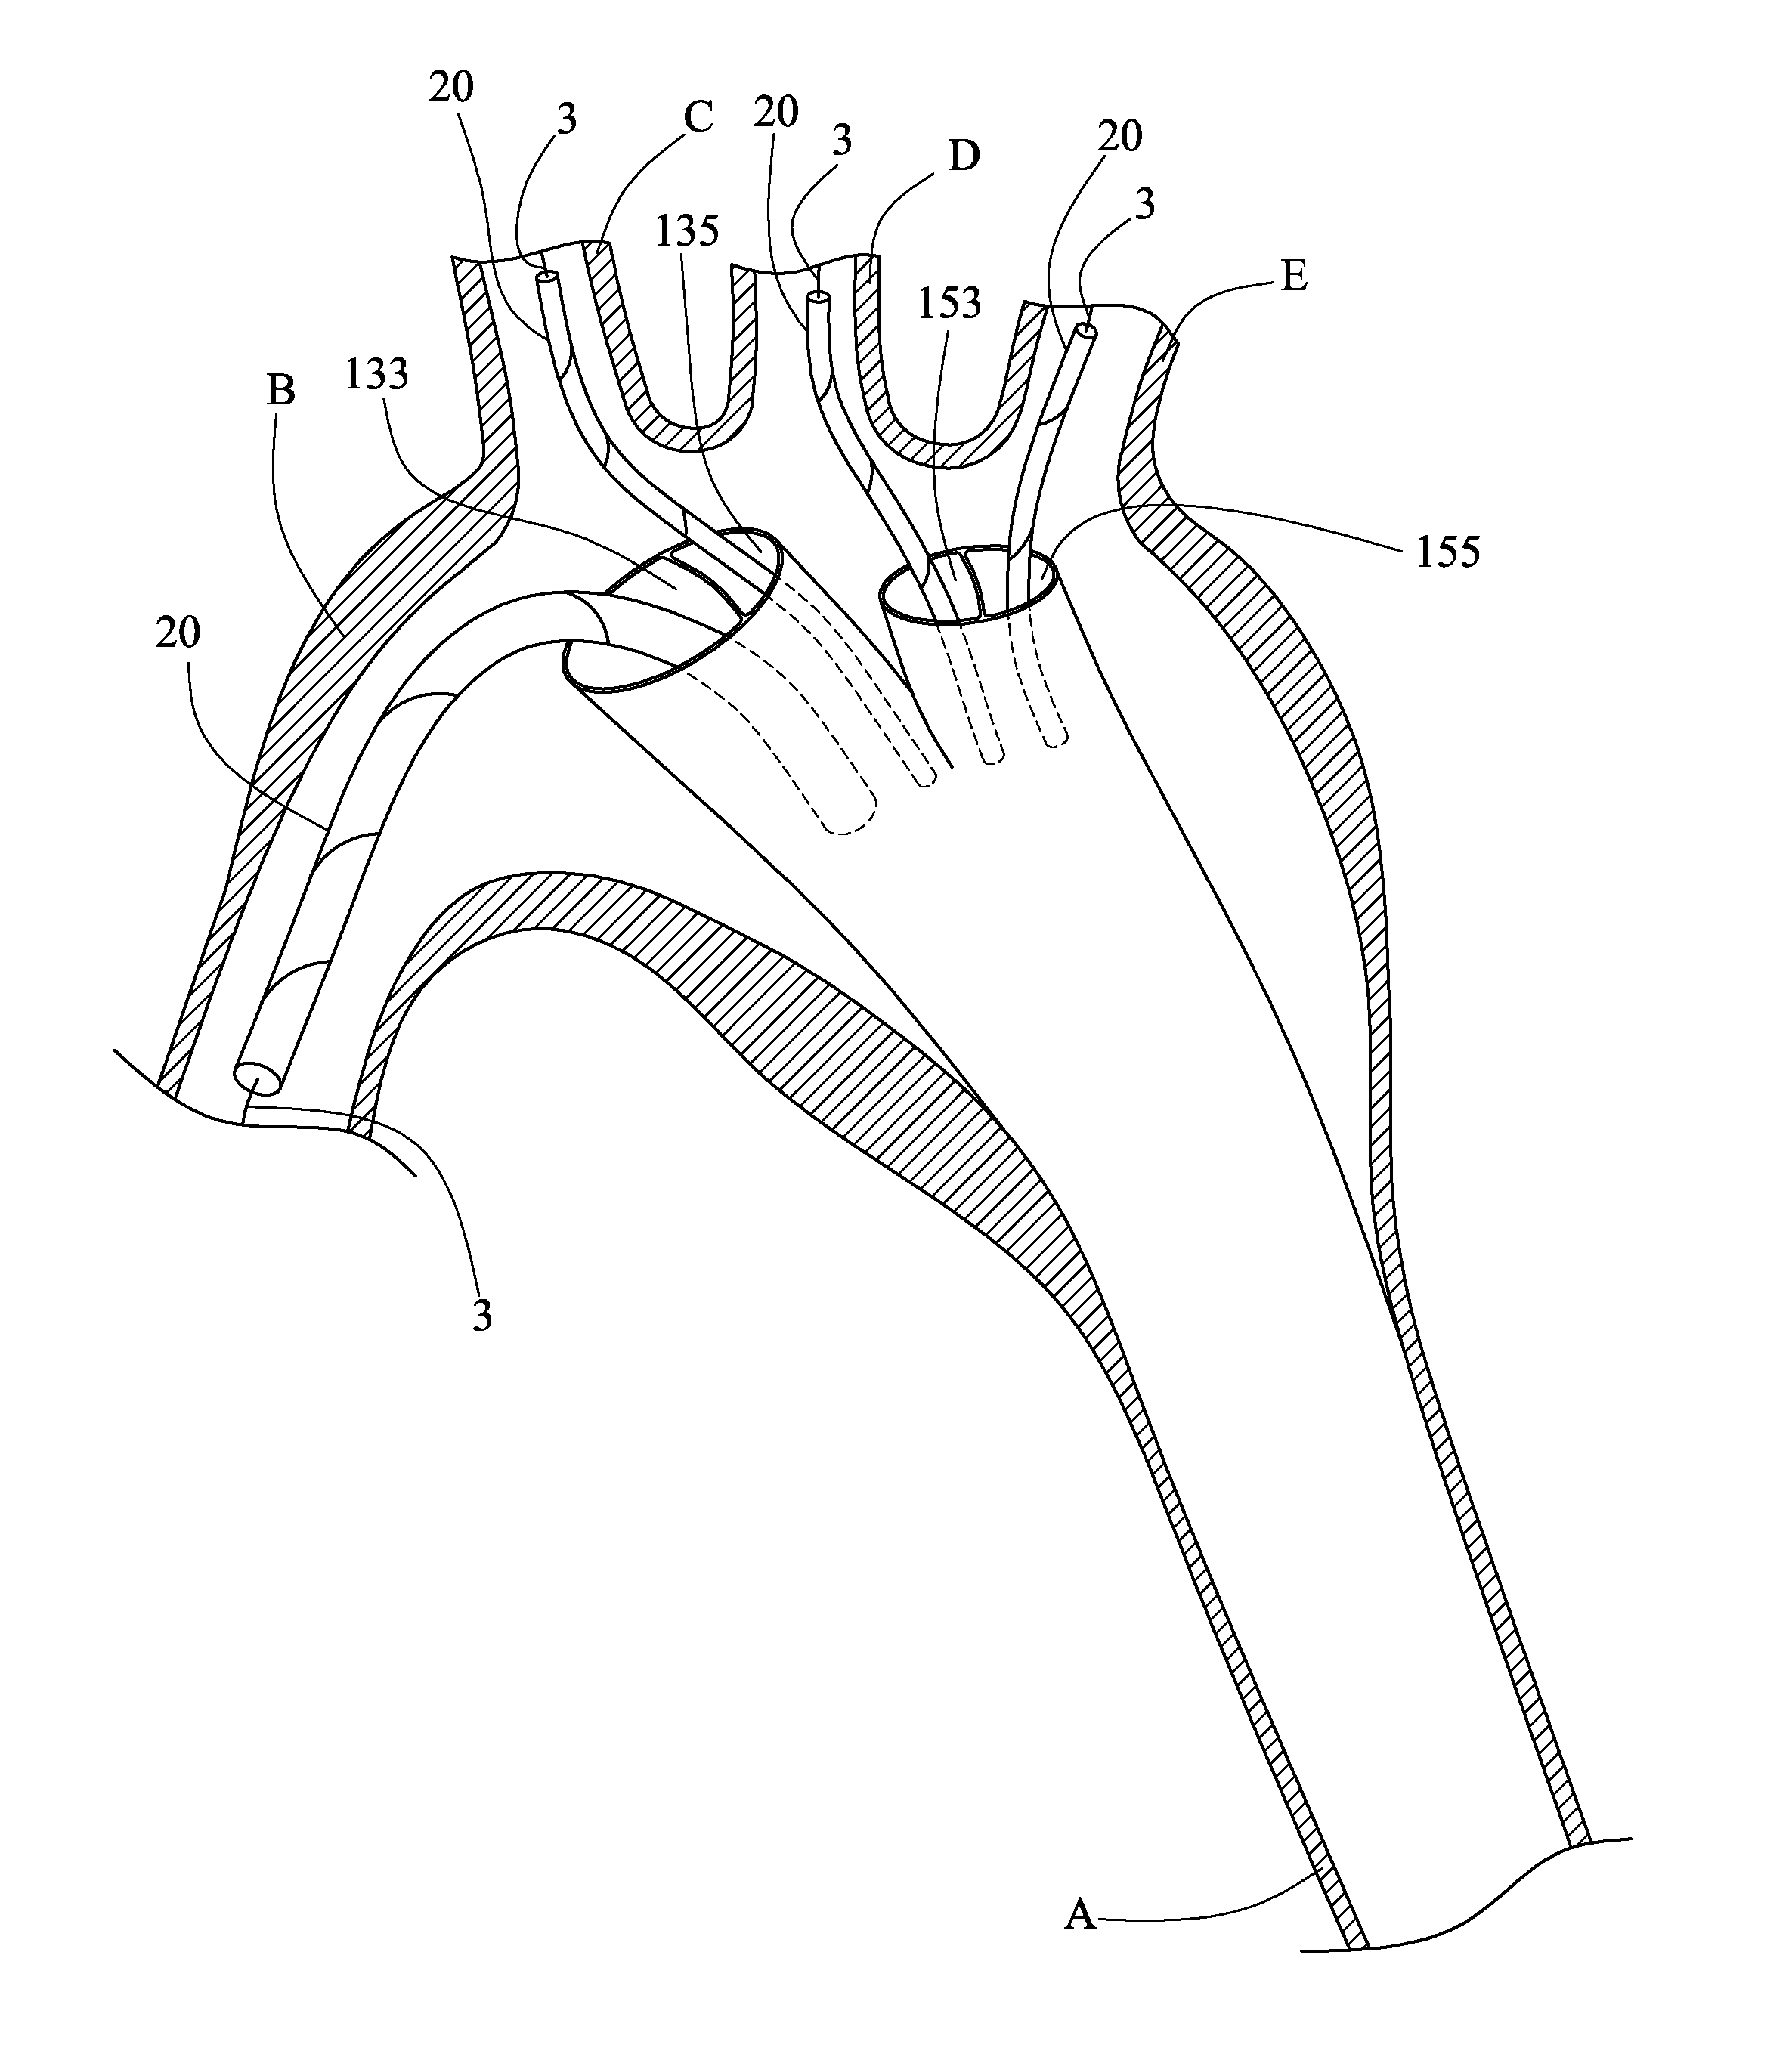 Method of implanting an aortic stent